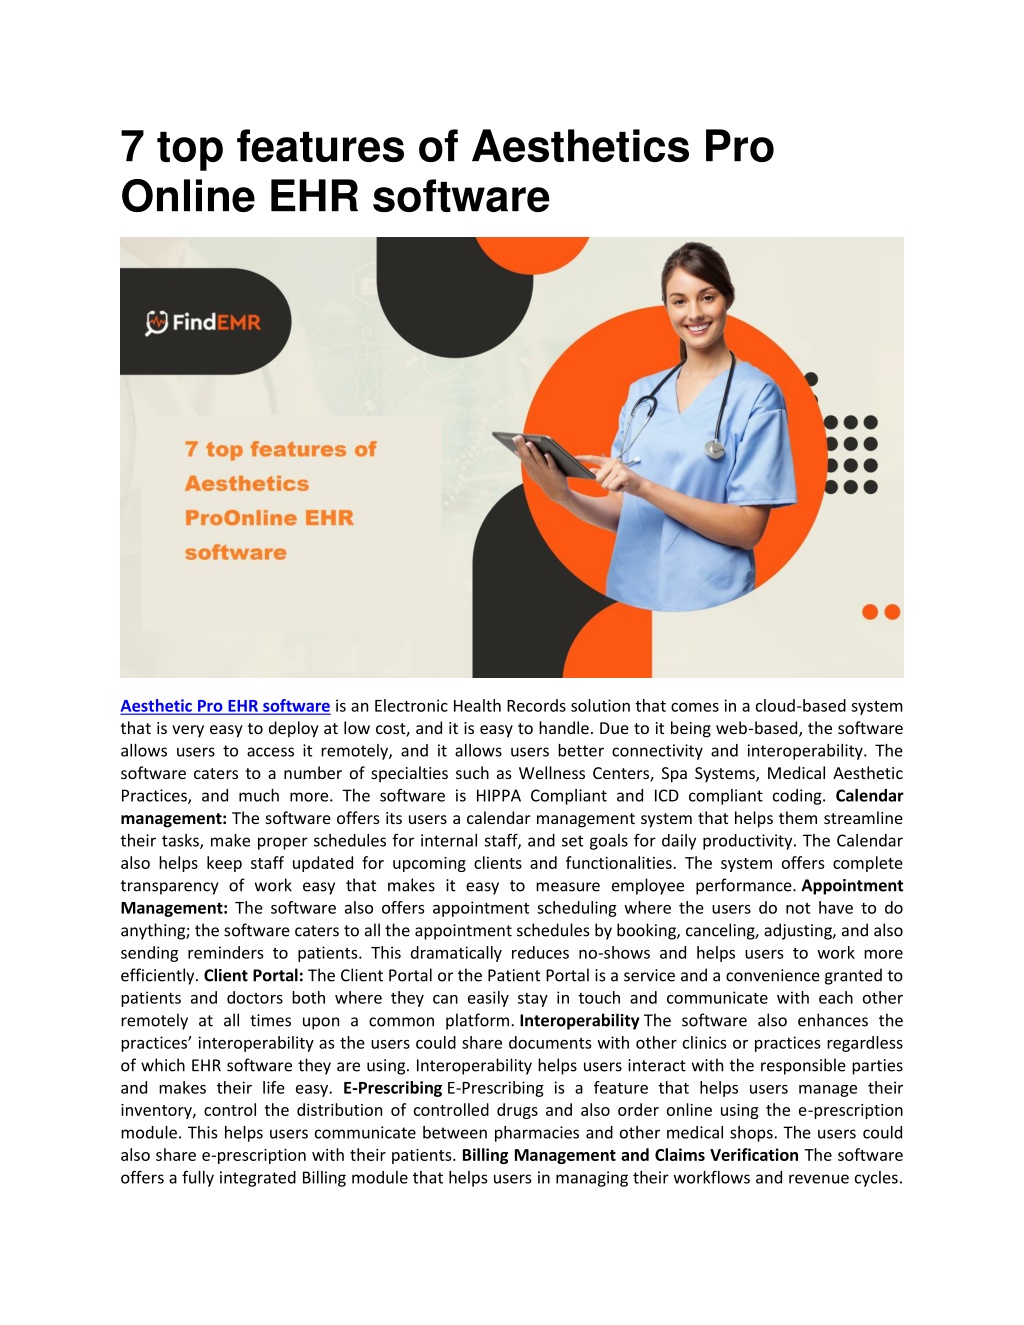 PPT - 7 top features of Aesthetics ProOnline EHR software PowerPoint ...